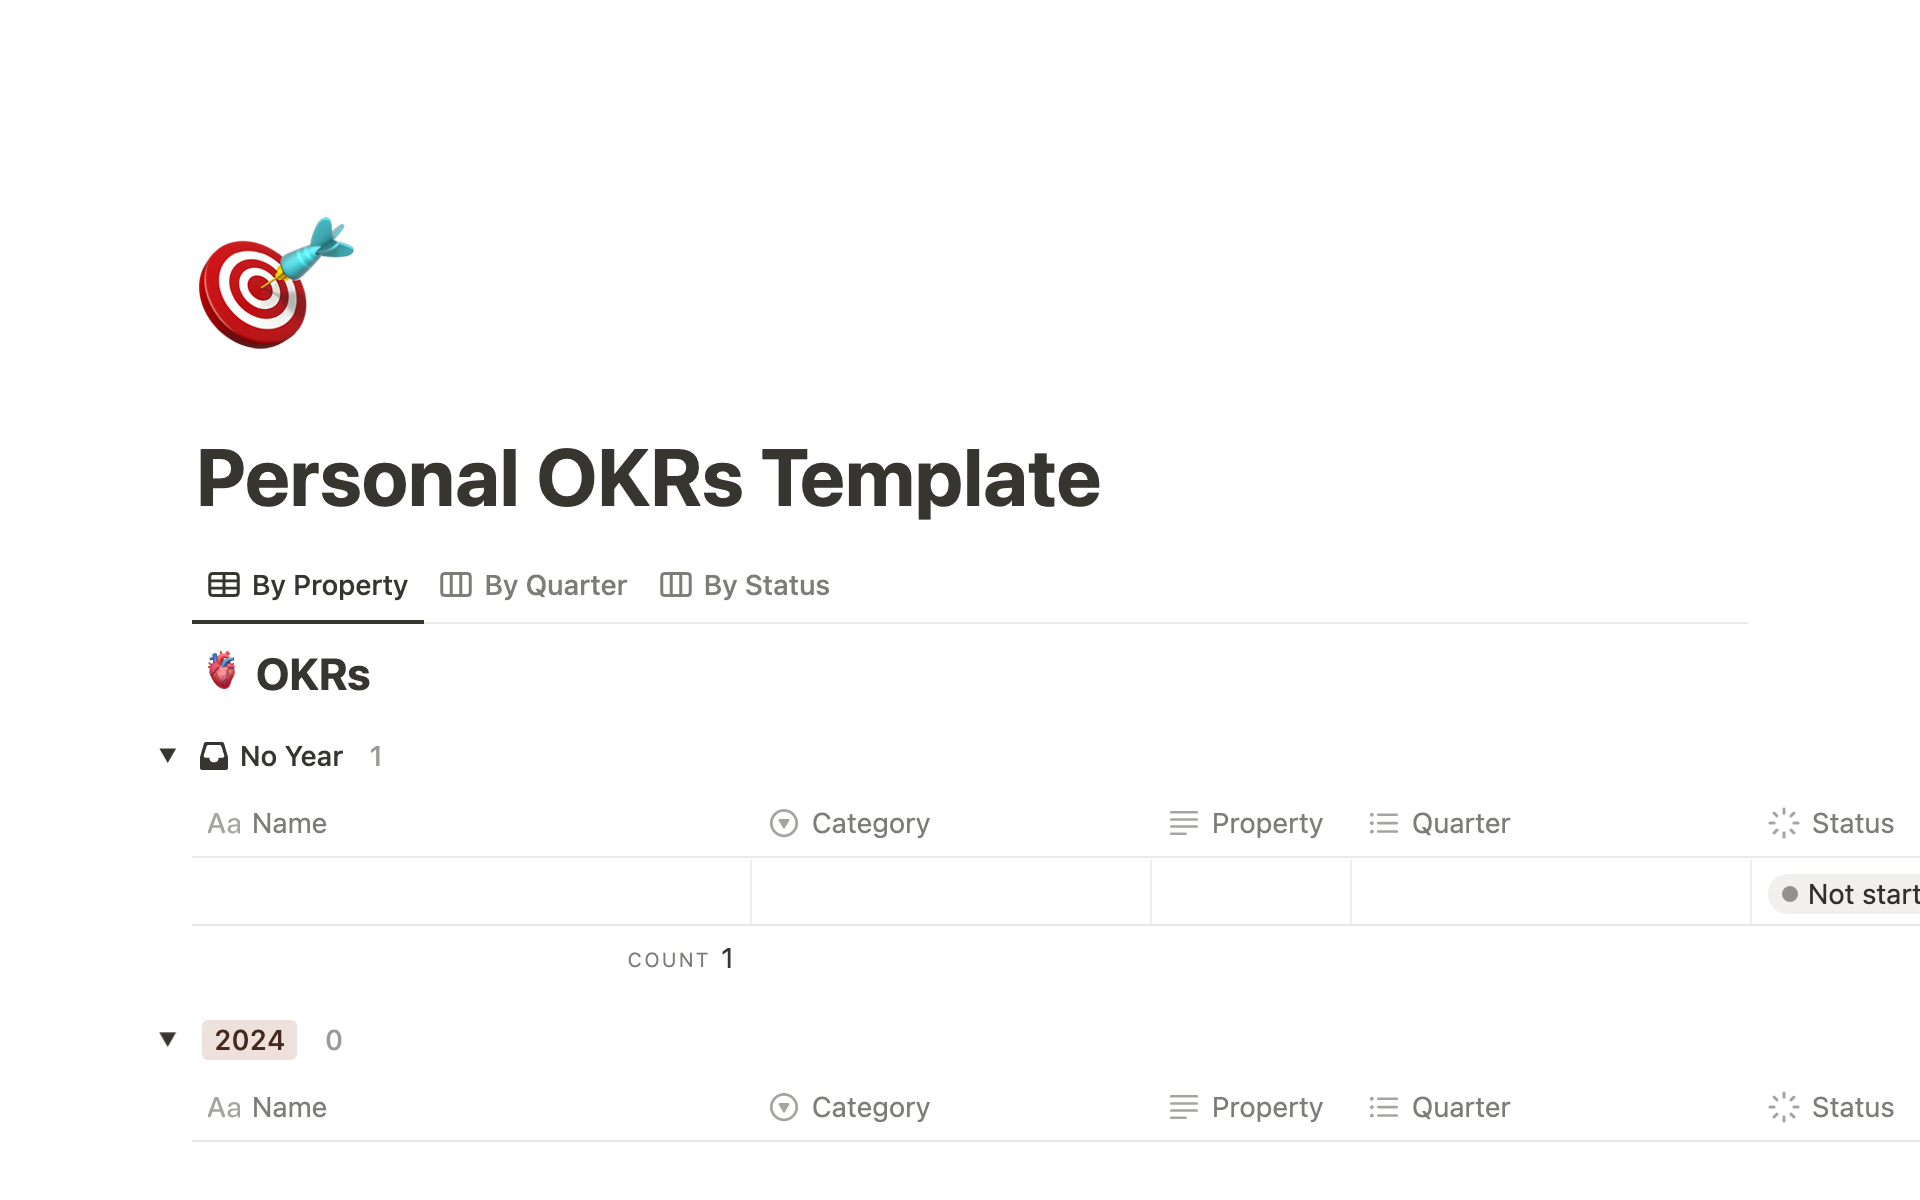 Achieve your goals efficiently with our Personal OKRs Notion Template.